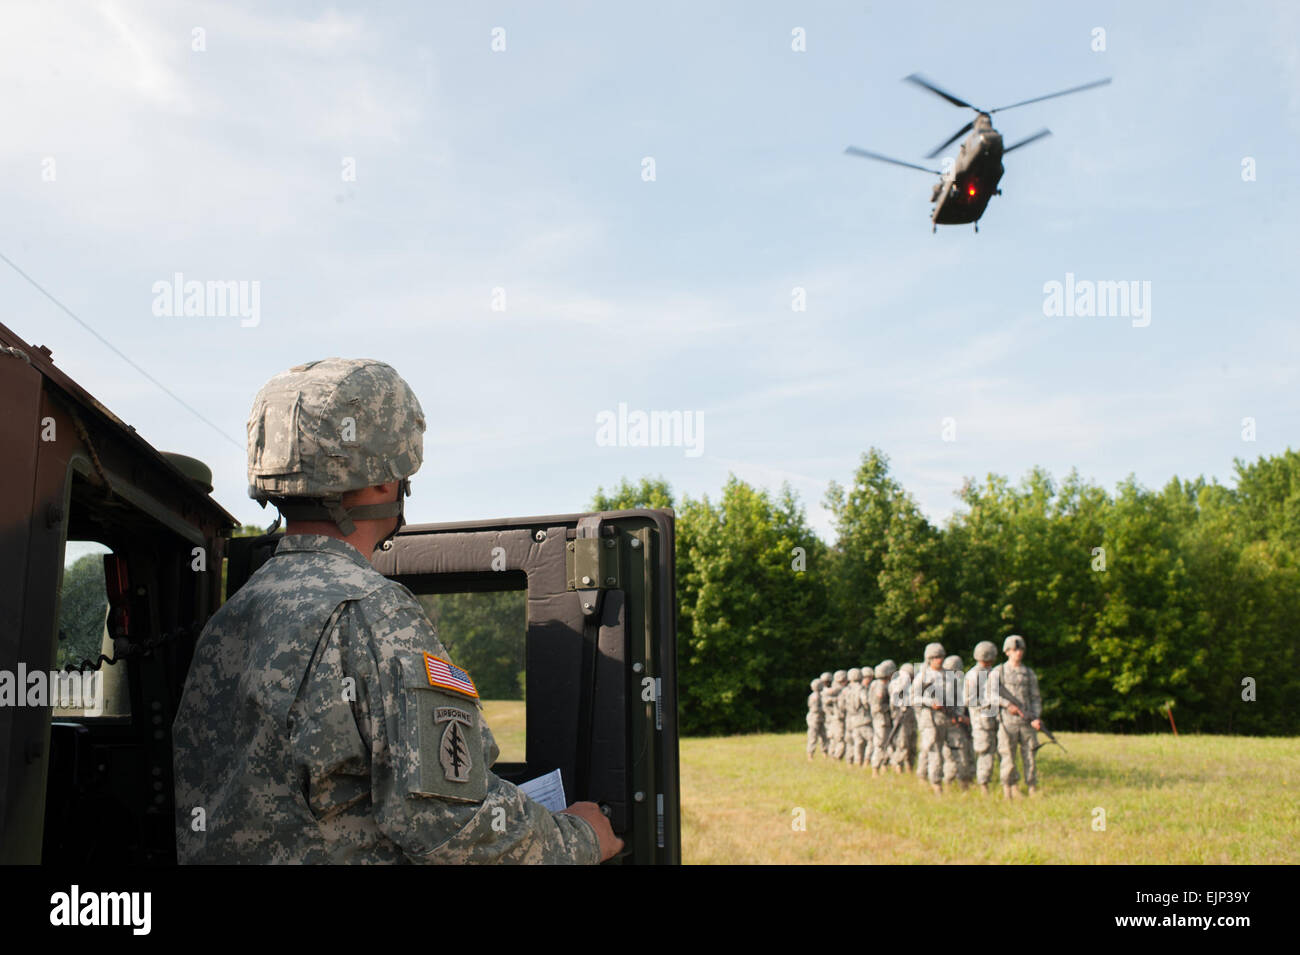 Sgt. 1st Class Marcum James, with the 244th Aviation Brigade and a native of Easton, Pennsylvania, watches as a CH-47 Chinook approaches a pick-up zone at the 2014 U.S. Army Reserve Best Warrior Competition, June 24, at Joint Base McGuire-Dix-Lakehurst, N.J. The helicopter and its crew are from Bravo Company, 5th Battalion General Support, 159th Regiment, 244th Aviation Brigade, 11th Theater Aviation Command, Fort Eustis, Va.  Timothy L. Hale Stock Photo